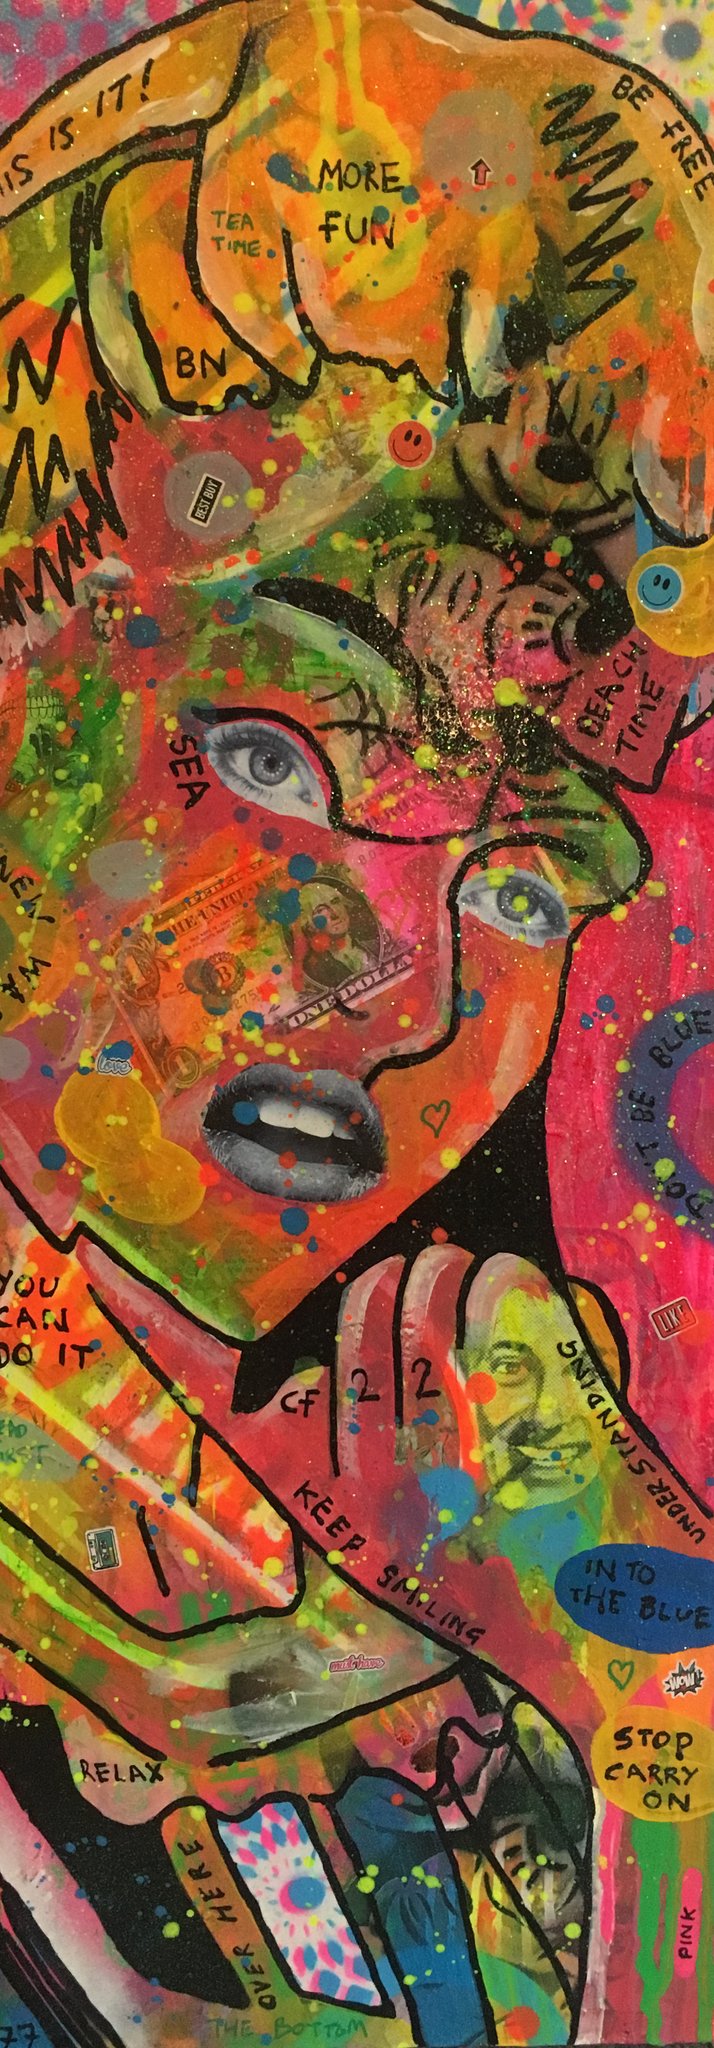 High Noon by Barrie J Davies 2017, Mixed media on canvas, 30cm x 80cm, unframed. Barrie J Davies is an Artist - Pop Art and Street art inspired Artist based in Brighton England UK - Pop Art Paintings, Street Art Prints & Editions available.